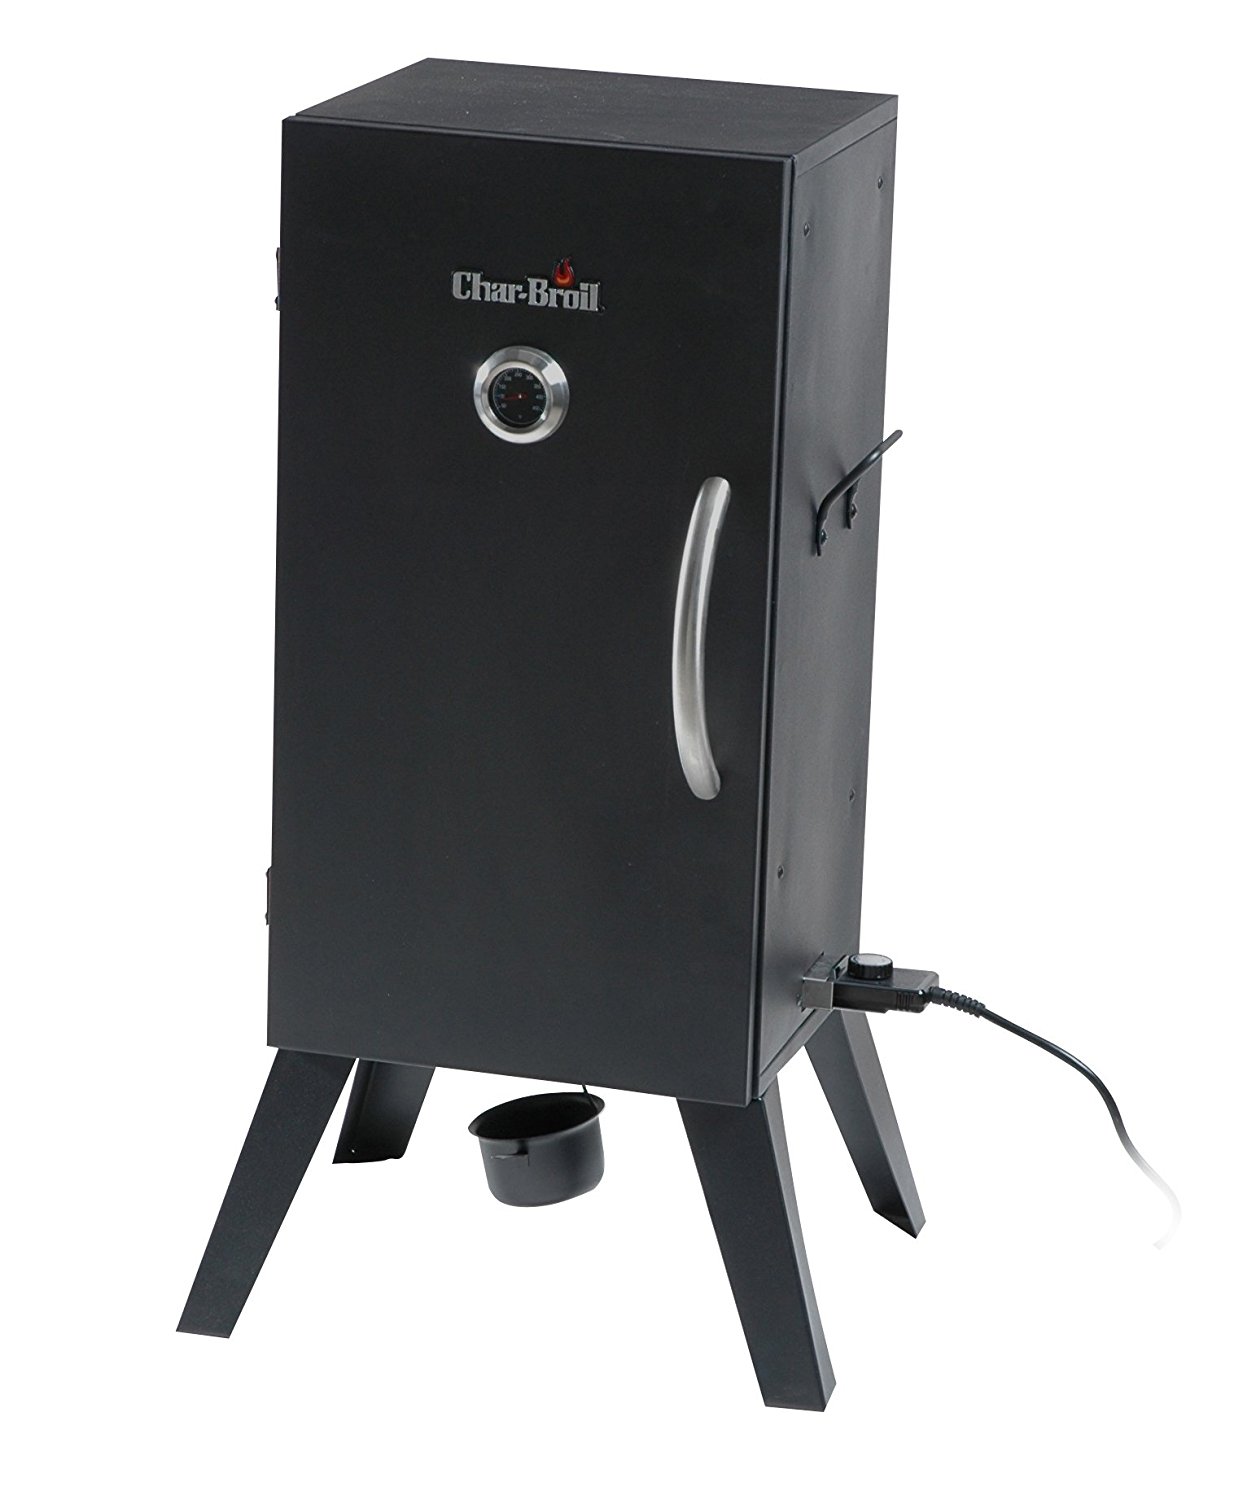 Char-Broil 30 in. Electric Vertical Smoker - image 2 of 2